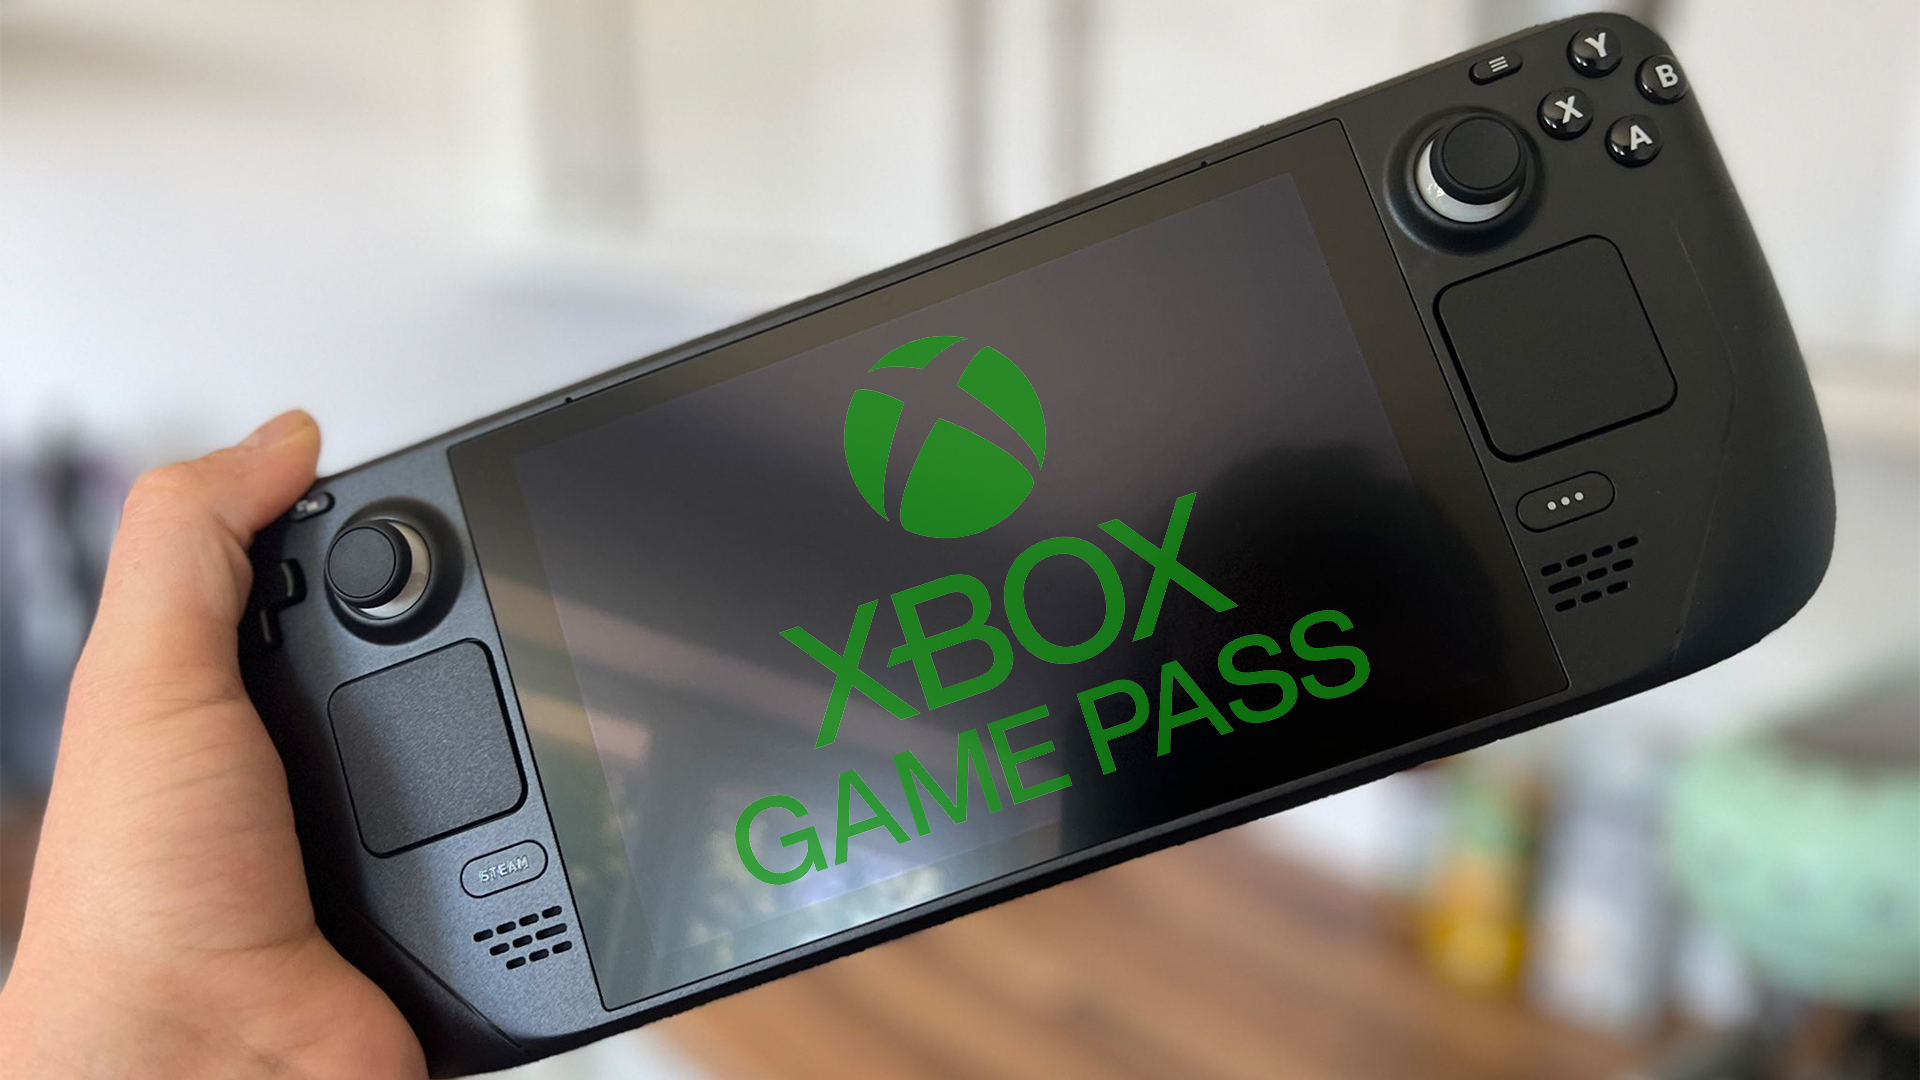 Xbox Cloud Gaming for Steam Deck makes Game Pass games portable, but needs  work